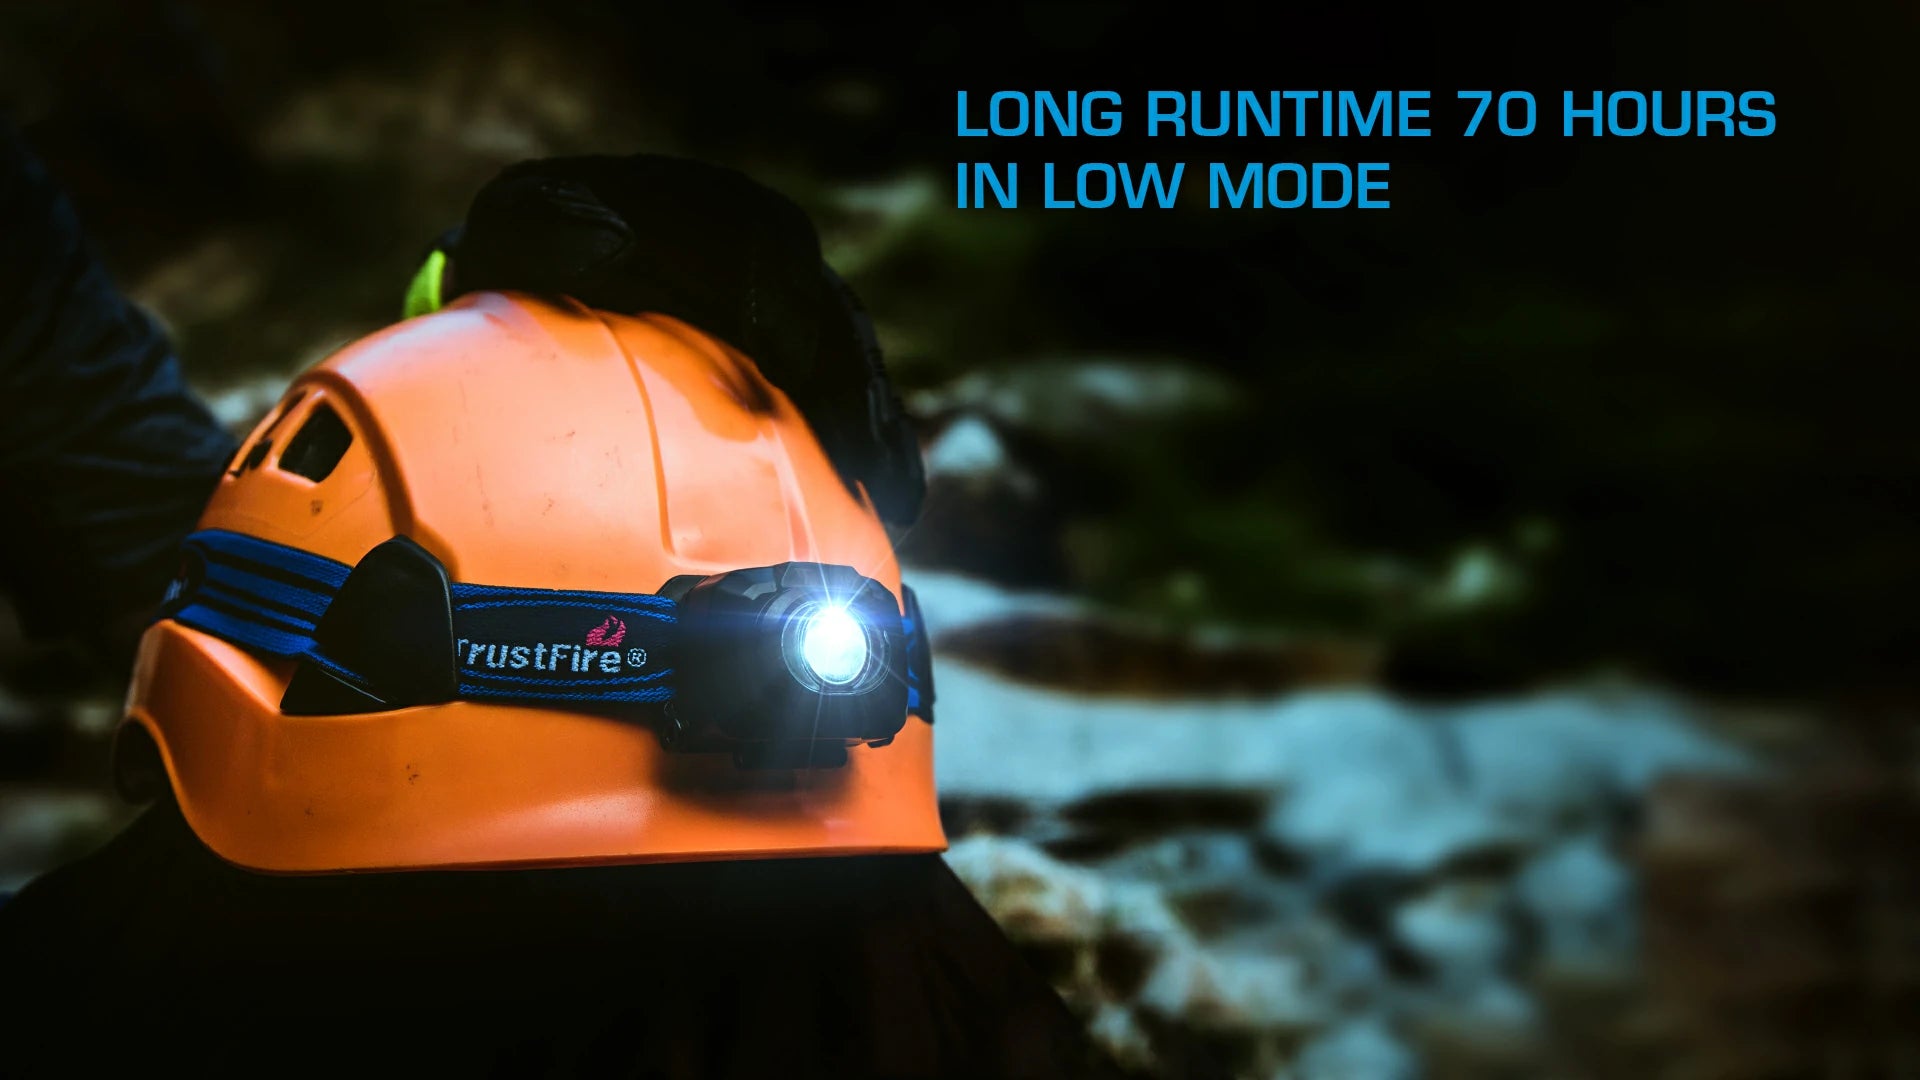 HL3R Rechargeable Headlamp